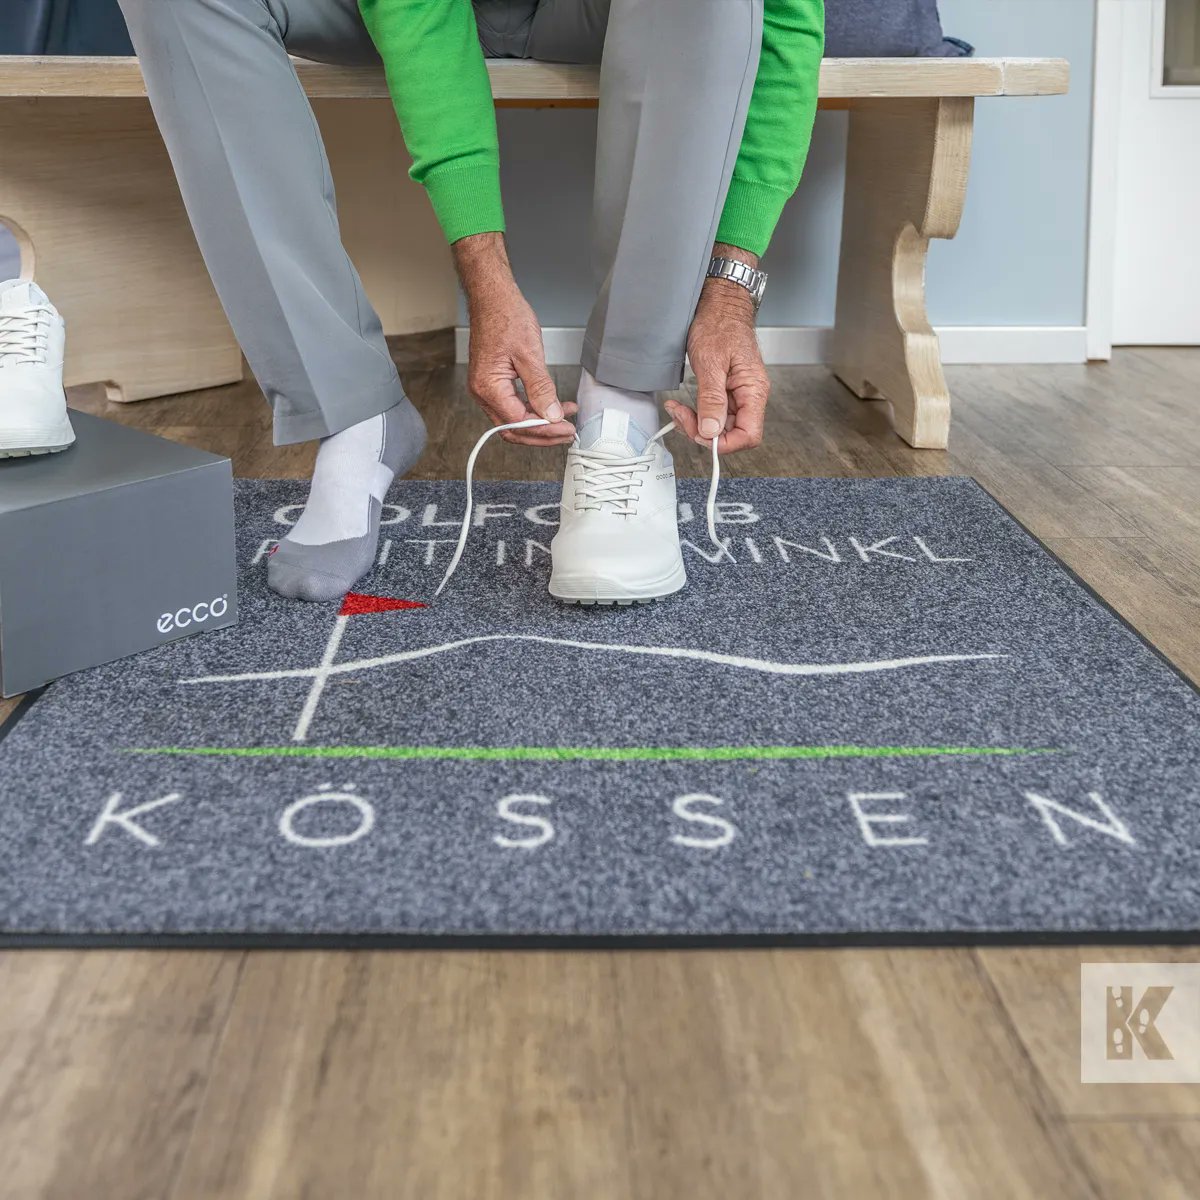 Selling golf shoes? Don't forget to put your brand or message where your customer can't miss it.#KleenTex #golfshoes #golflovers #golferlife #brandingsolution #floormats #KleenTexEurope #makemoreofyourfloor